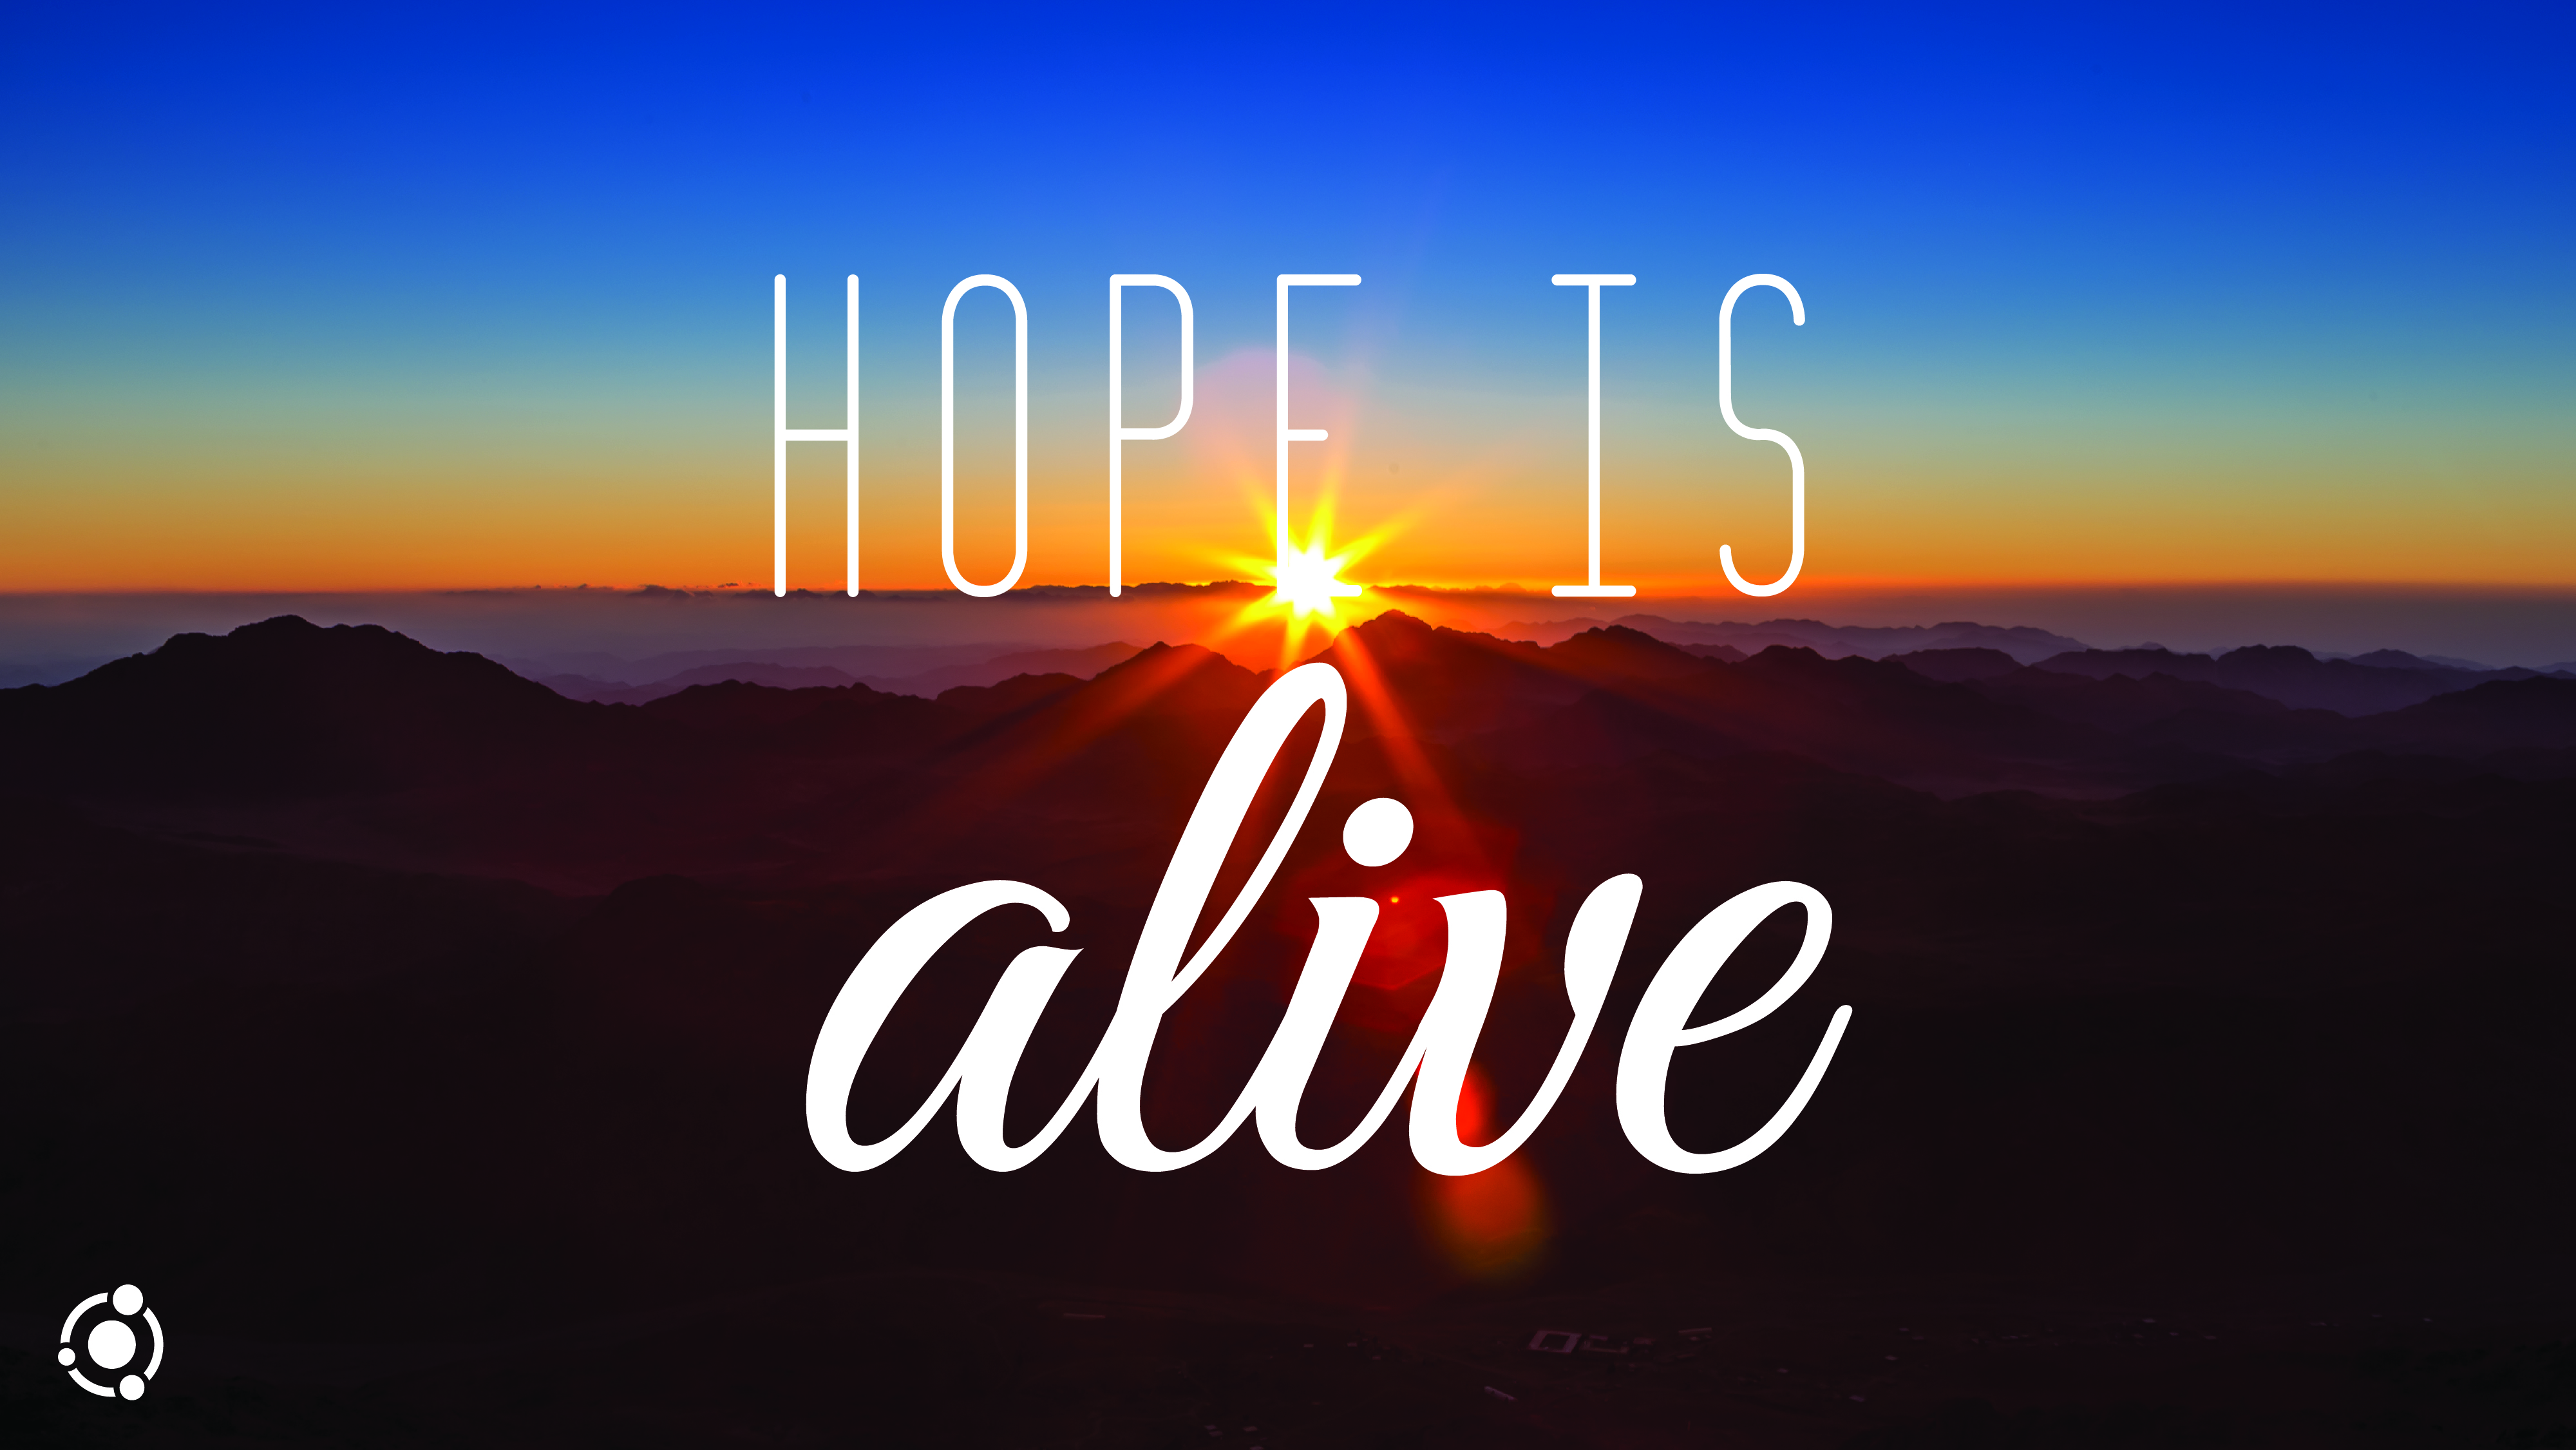 Hope Is Alive New Covenant Christian Church